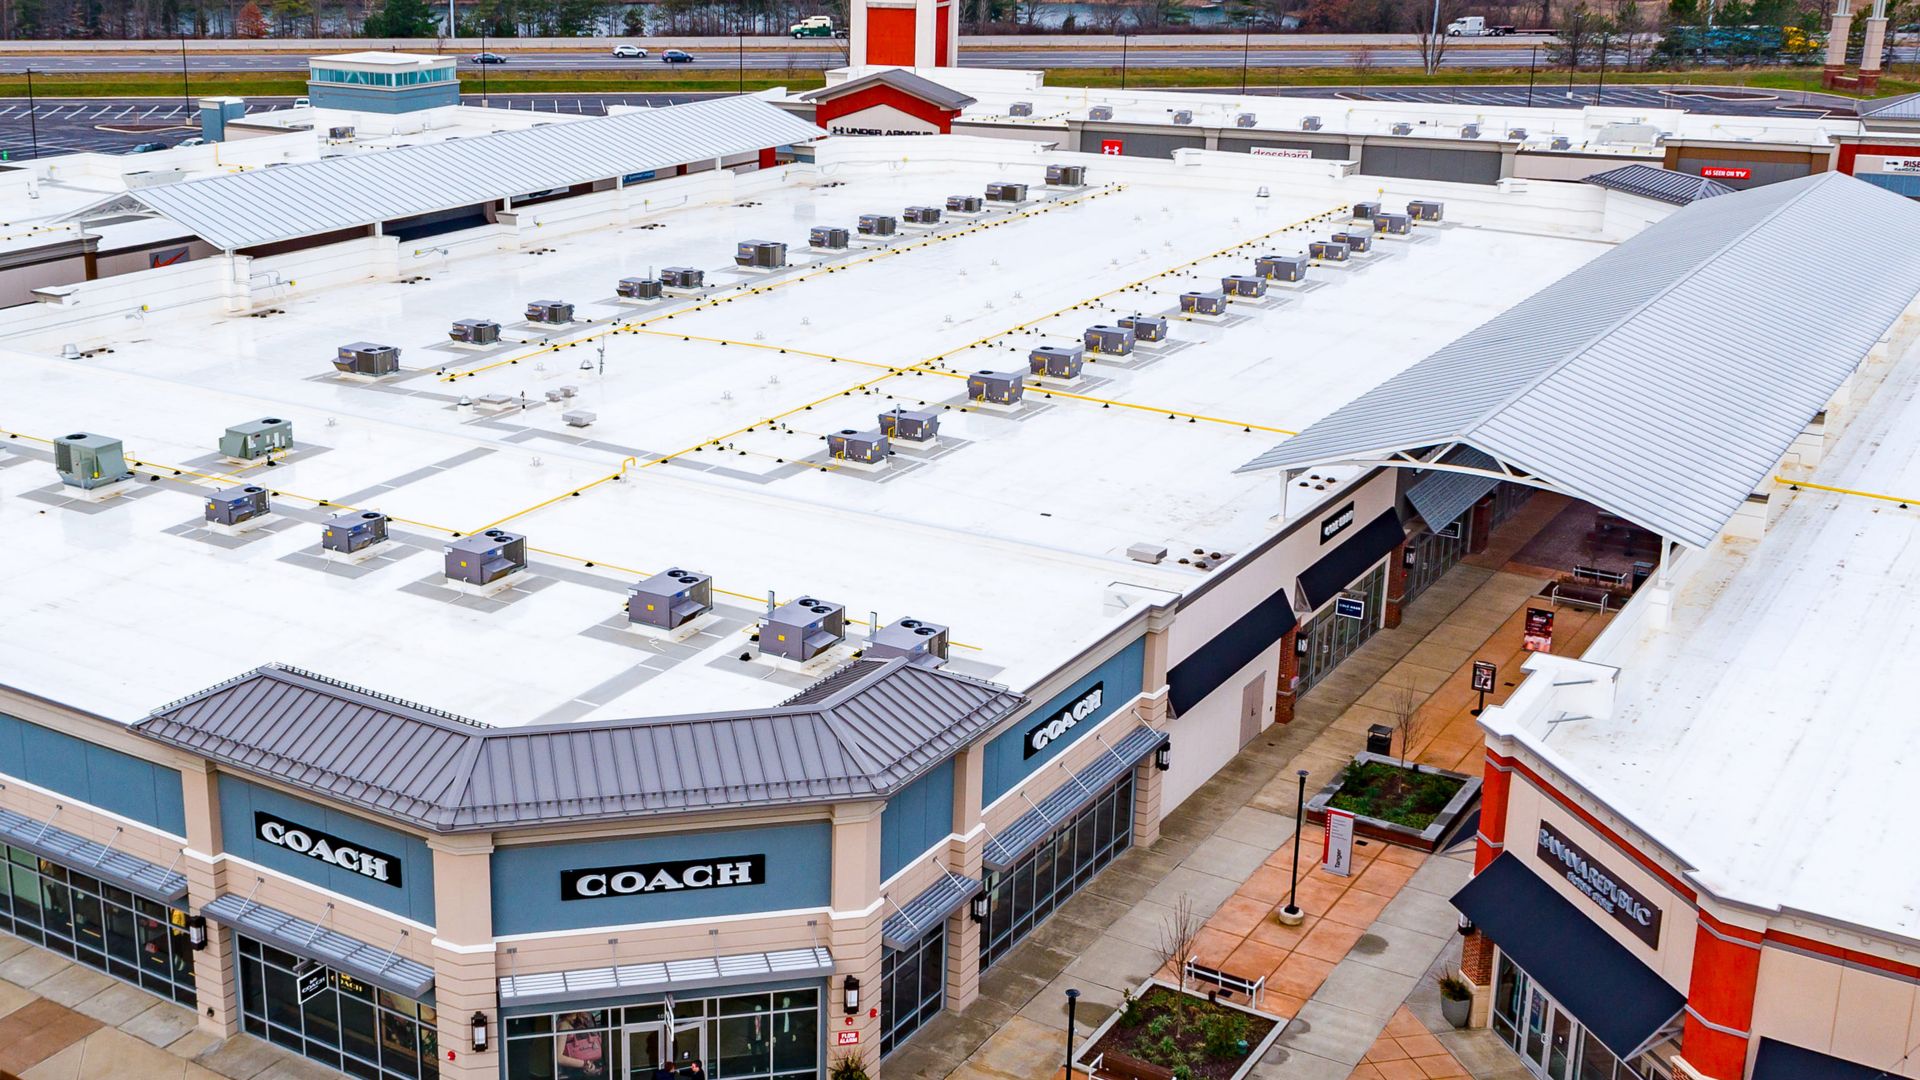 White Sarnafil membrane roof on the top of the Tanger Outlets in Sunburg Ohio